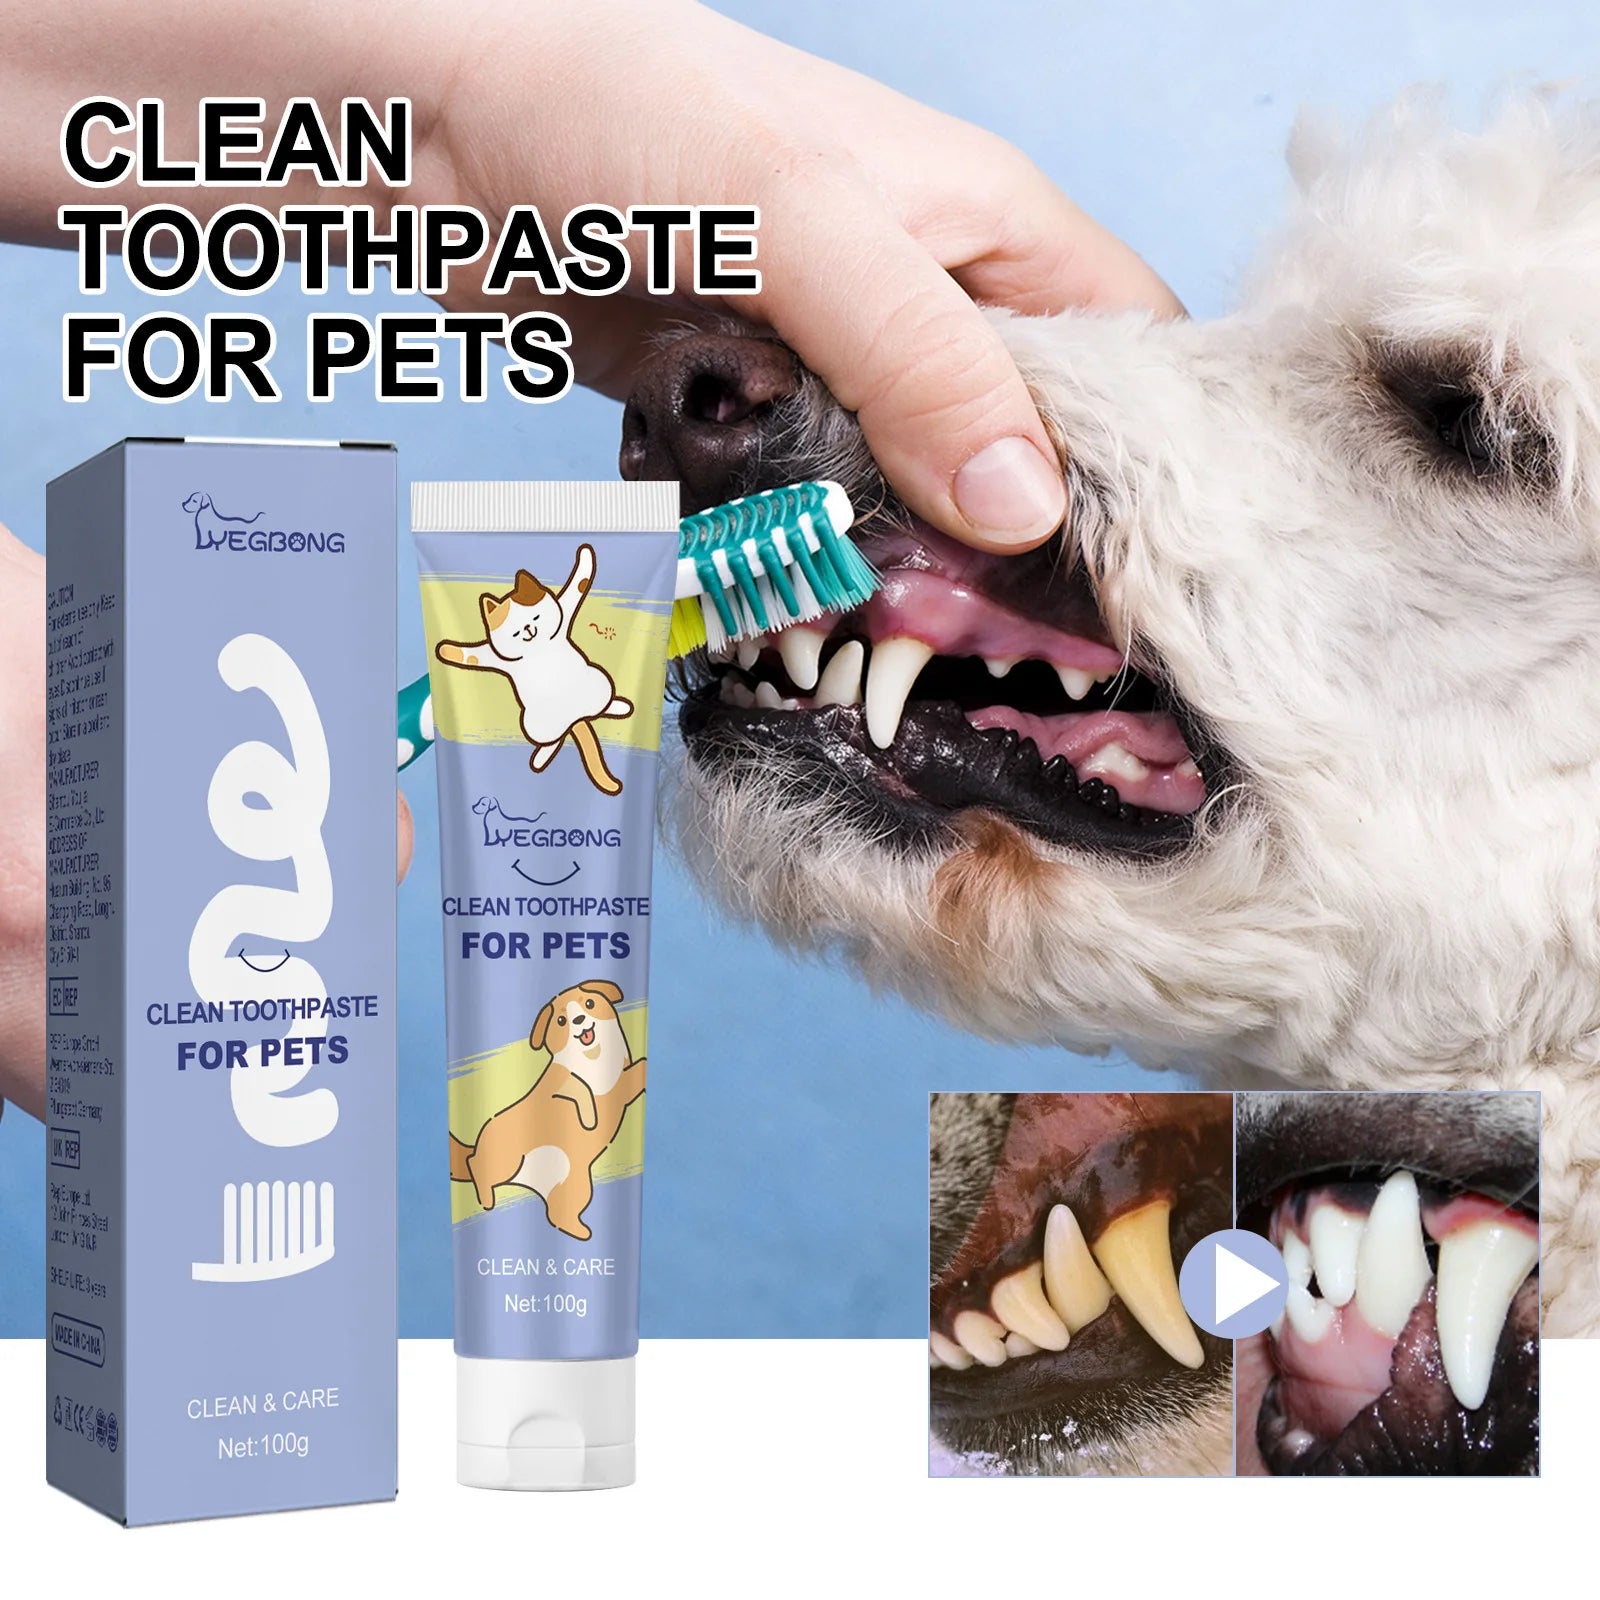 Pet Toothpaste Kitten Dental Plaque Tartar Removal Teeth Whitening Toothpaste Dog Mouth Fresh Deodorant Oral Care Grooming Tools